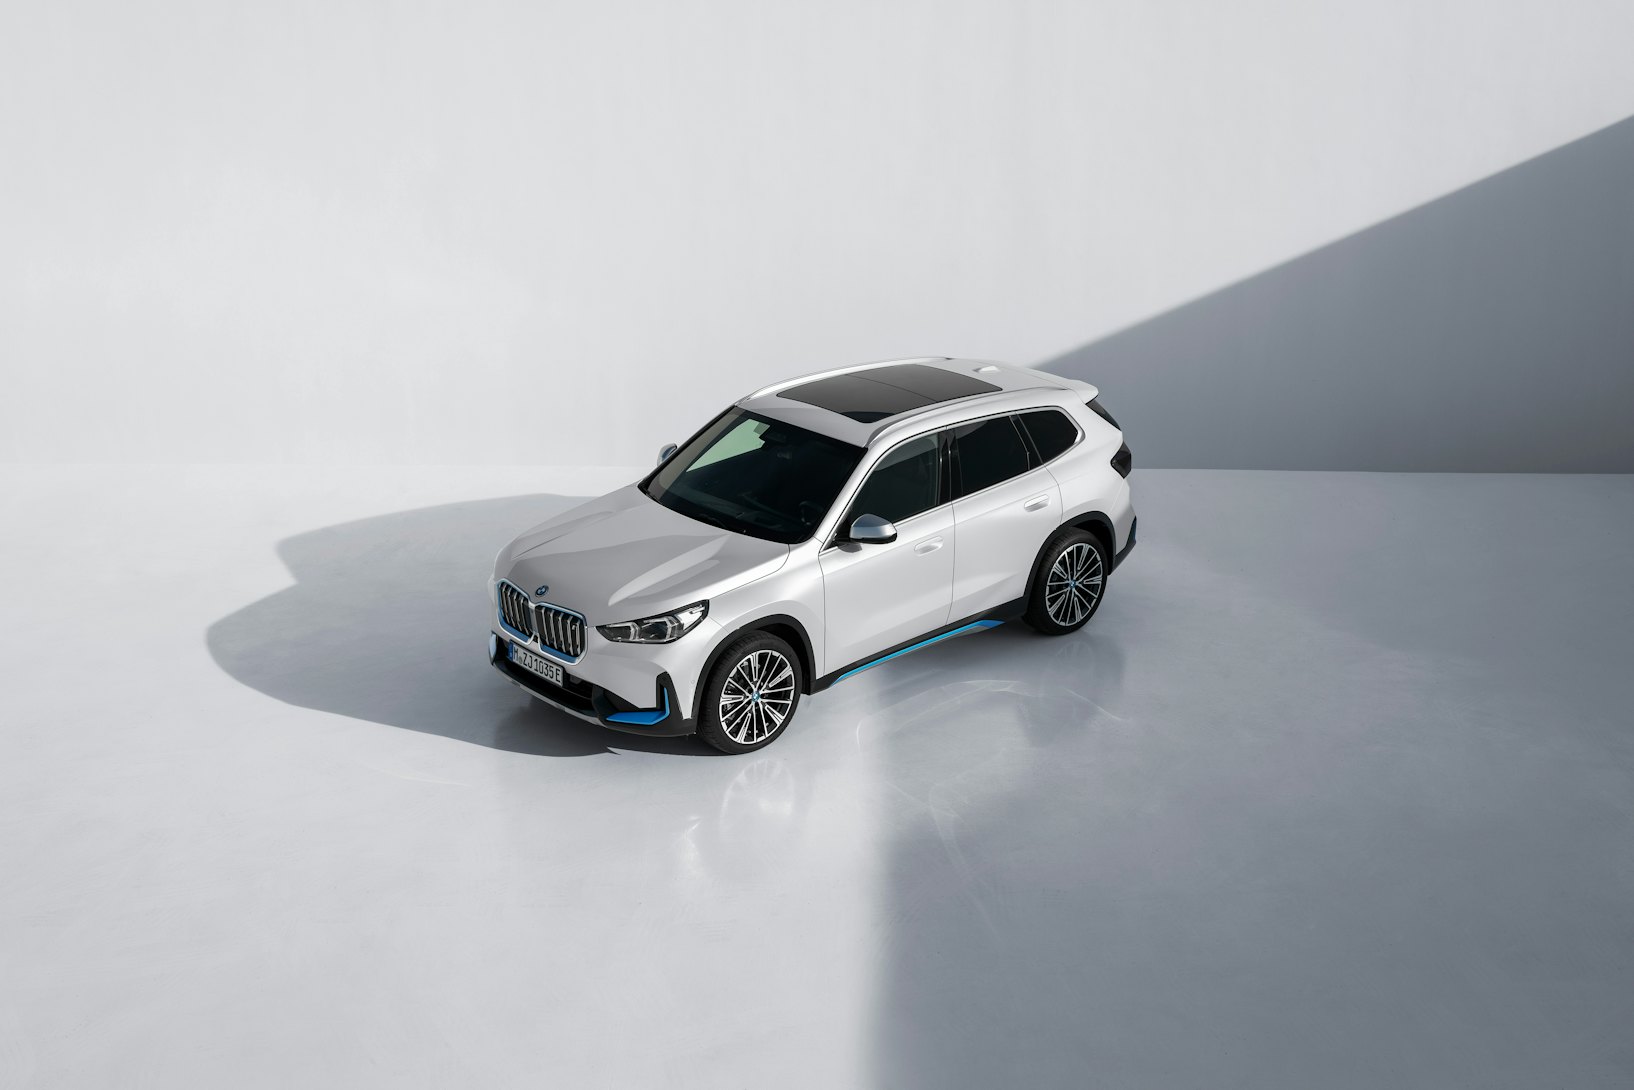 BMW's iX1 electric SUV could be its most affordable EV yet